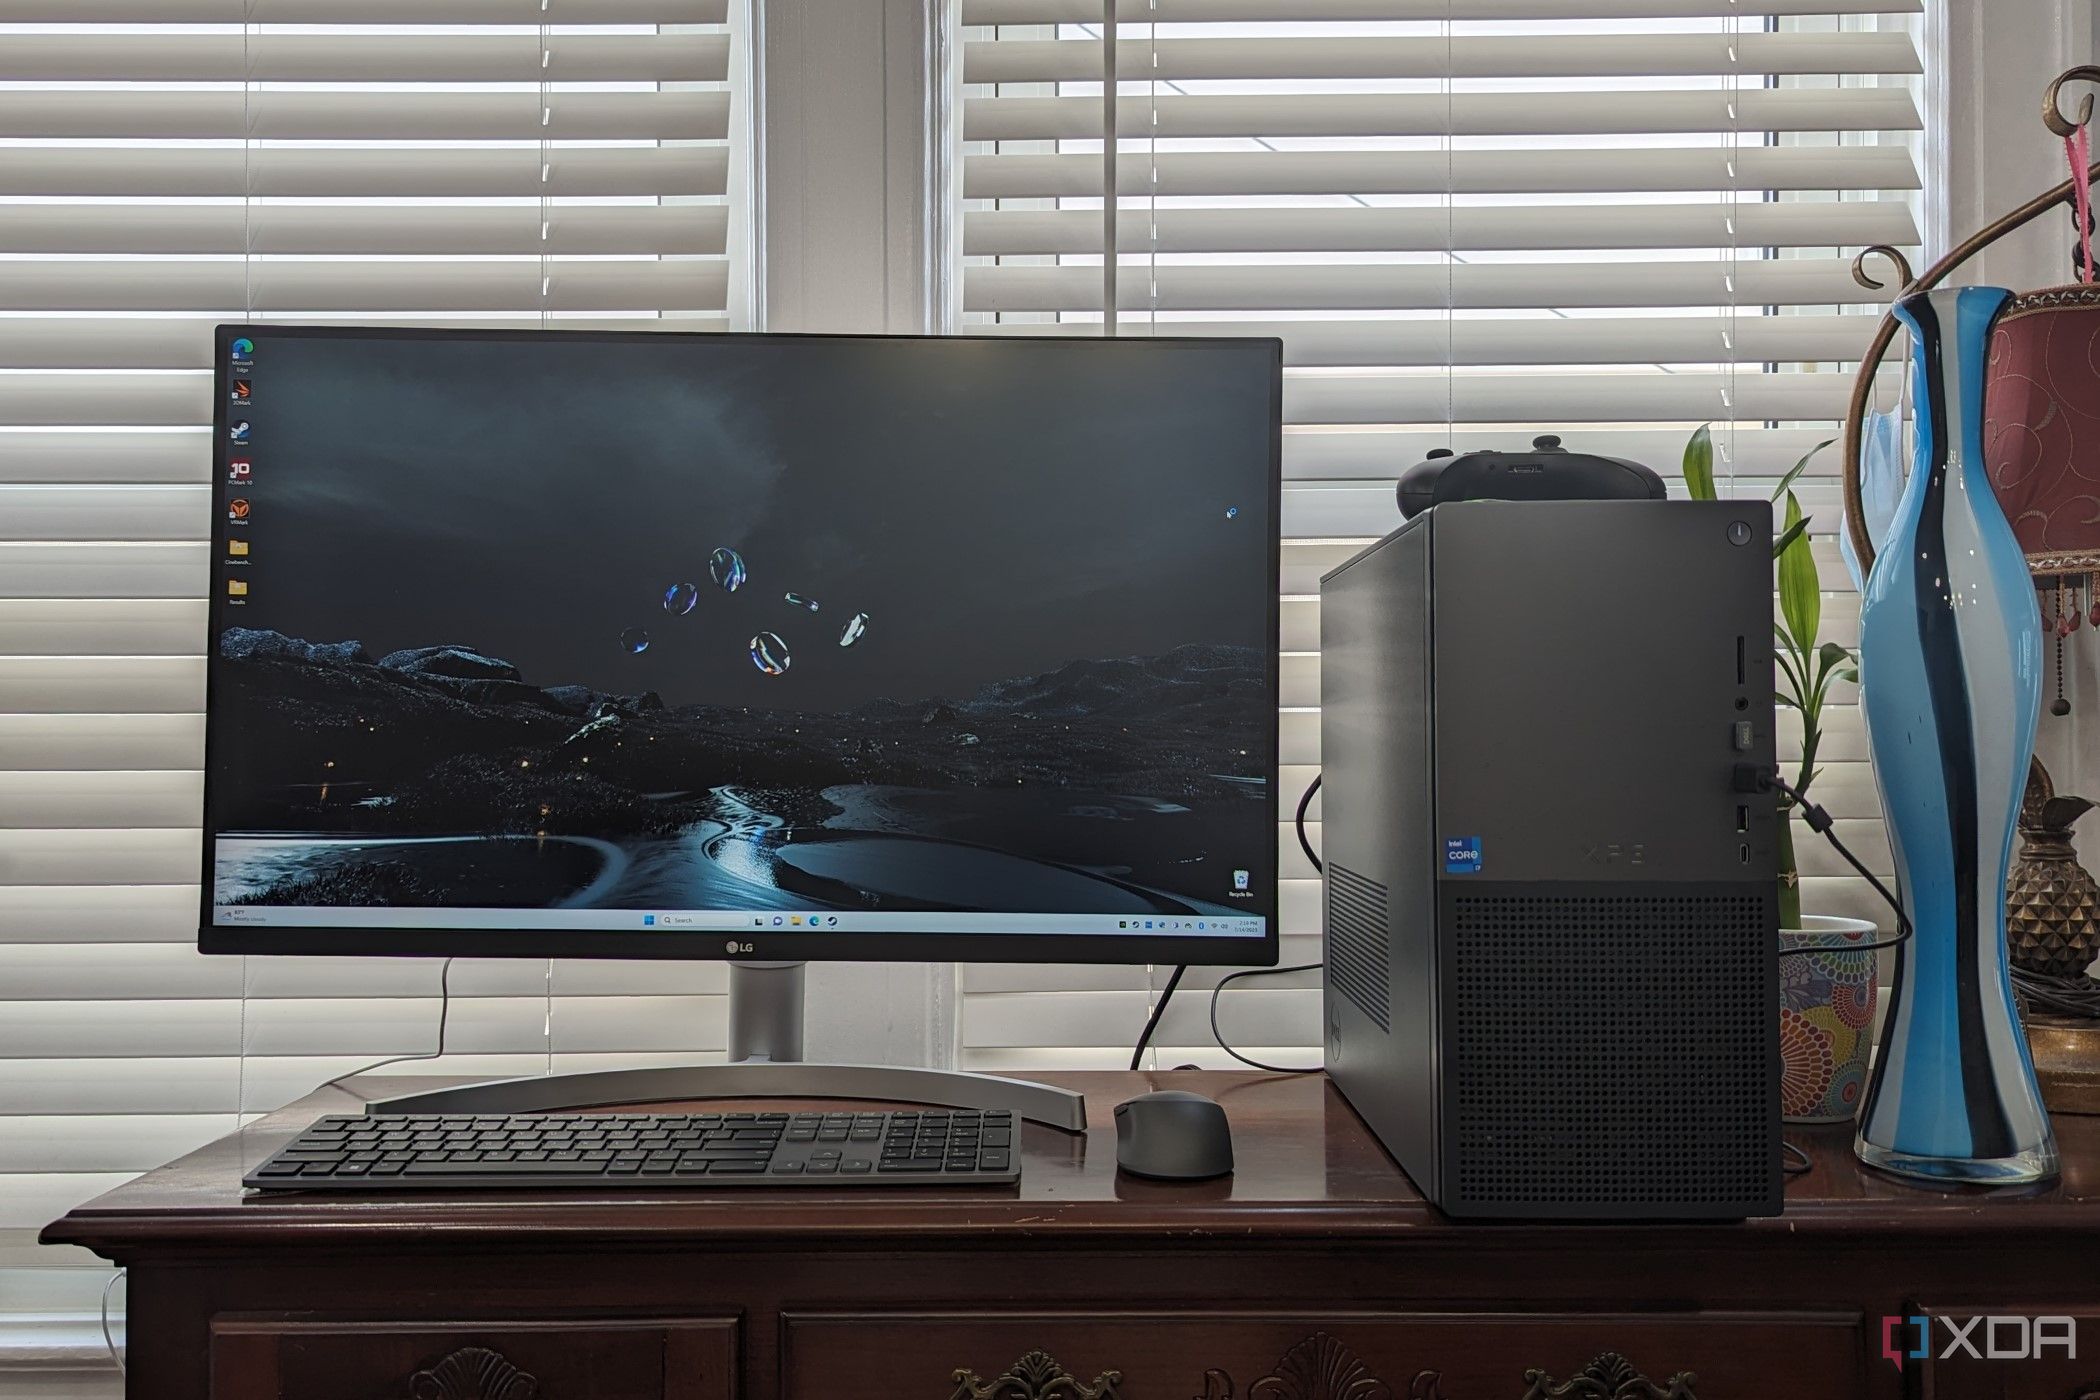 XPS Desktop 8960 sitting on a desk with vases and blinds in the back